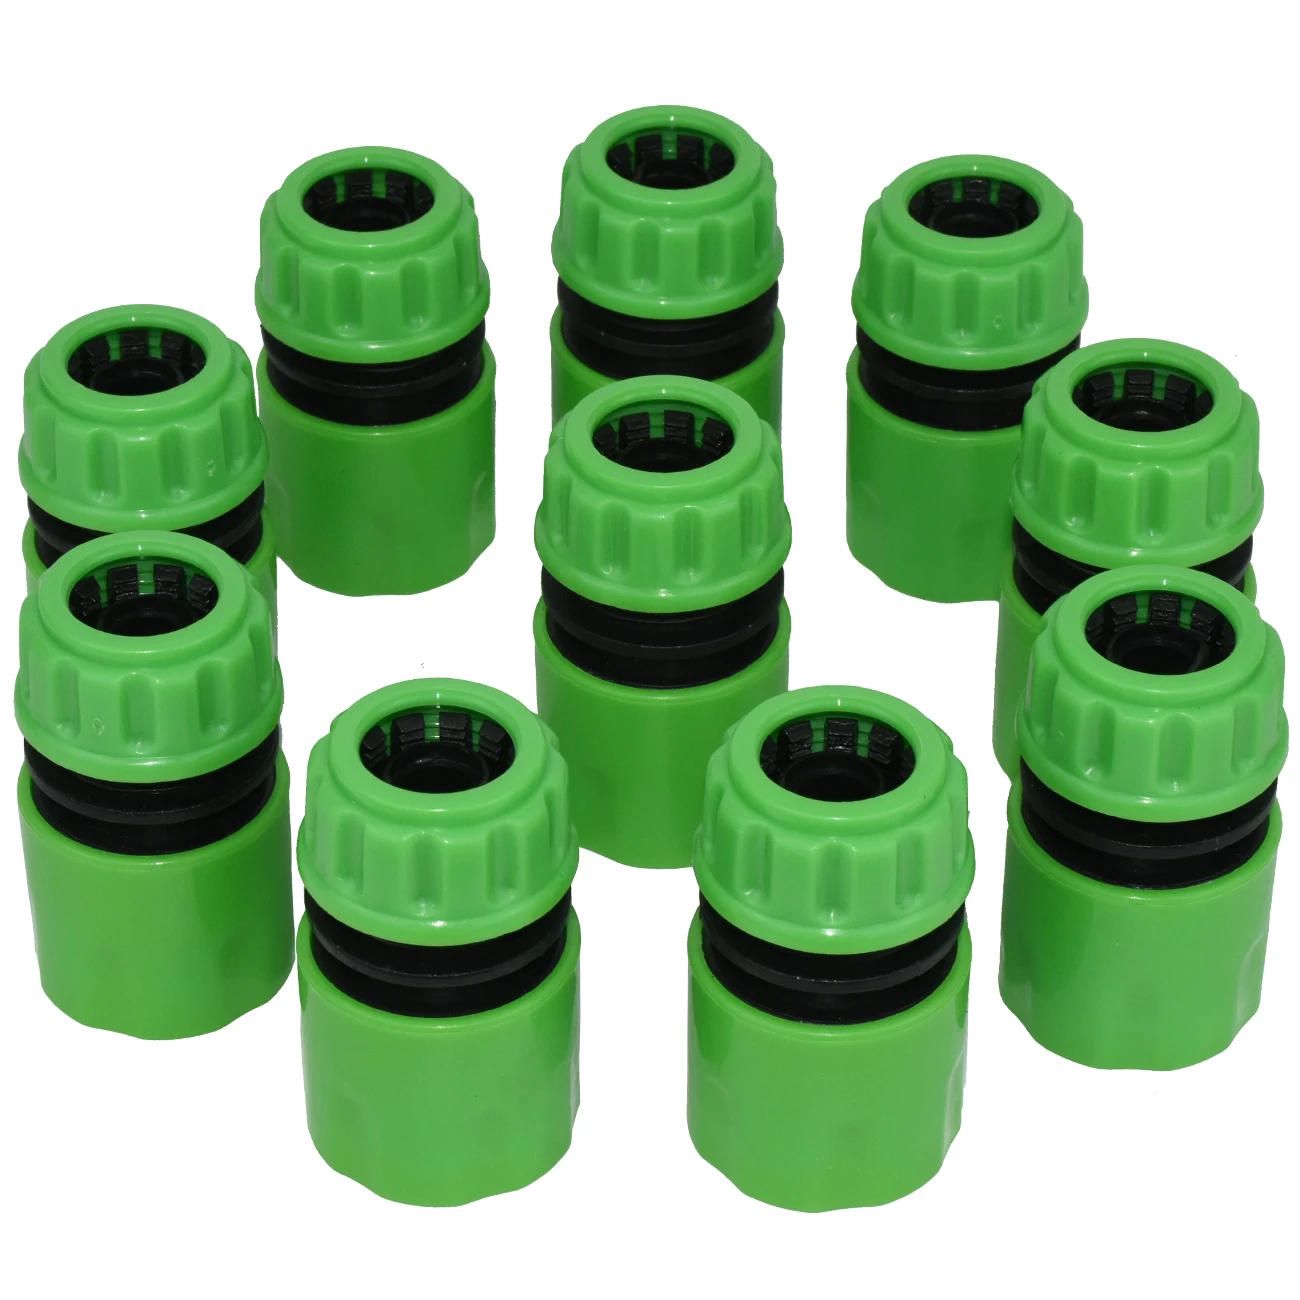 KESLA 10PCS 1/2 inch Garden Water Hose Quick Connector 16mm Pipe Tubing Repair Extension Fitting Watering Tap Adapter Greenhouse